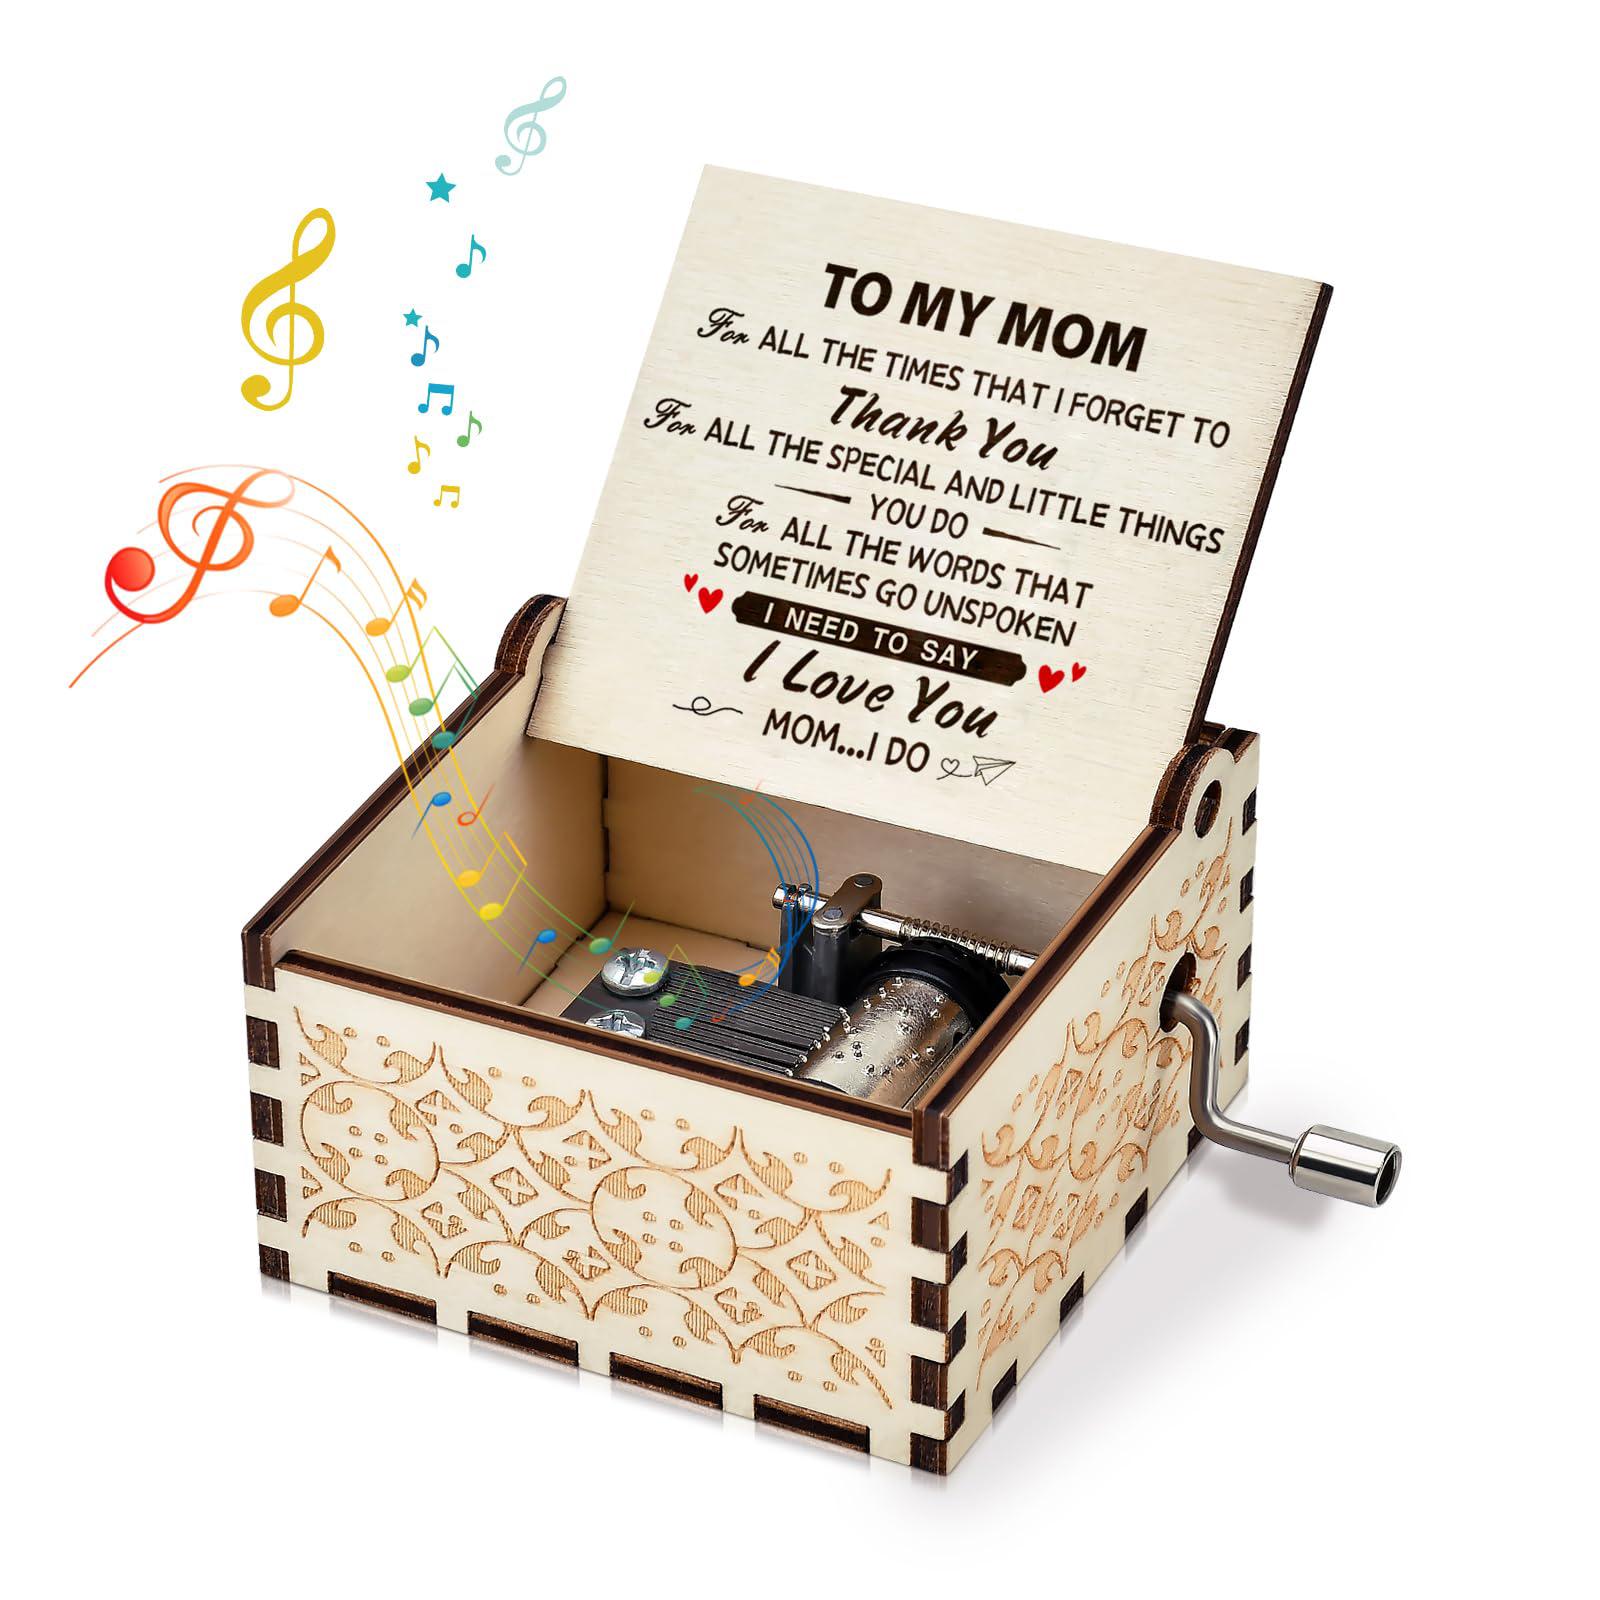 Likeny birthday gifts for mom wooden musical box gifts for mom from  daughter son womens gifts